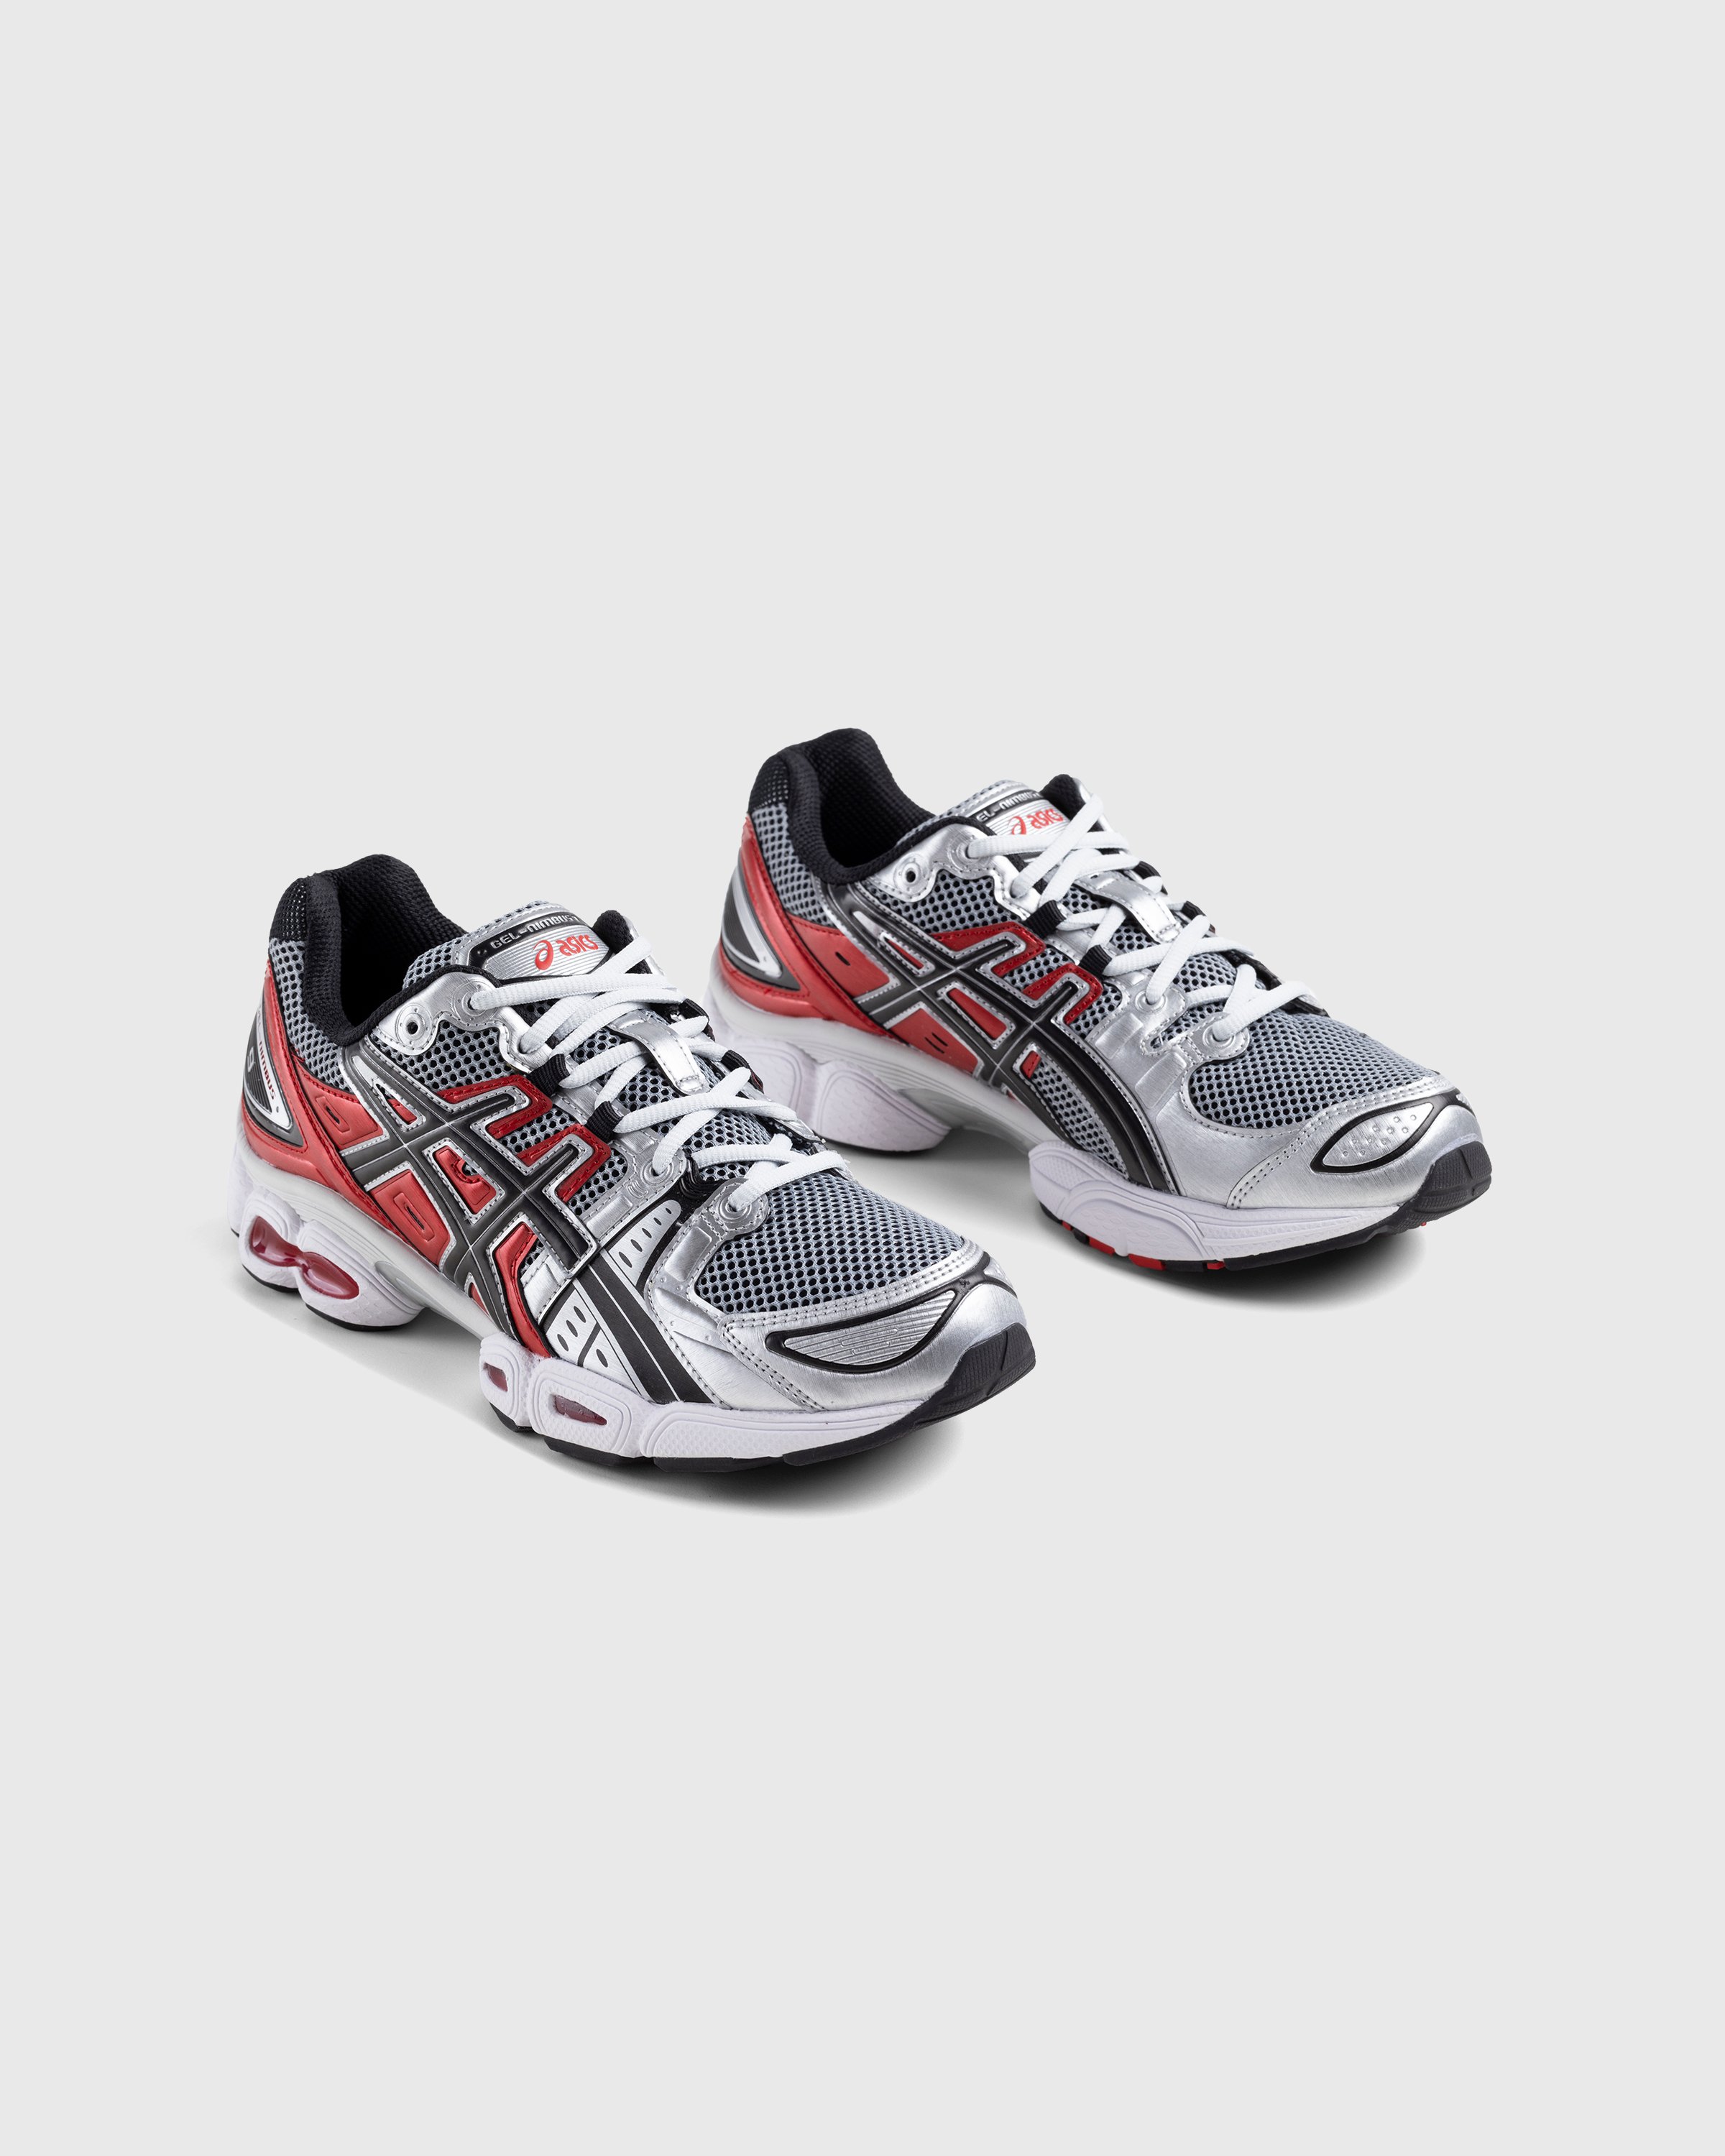 asics - Gel-Nimbus 9 Pure Silver/Classic Red - Footwear - Red - Image 4